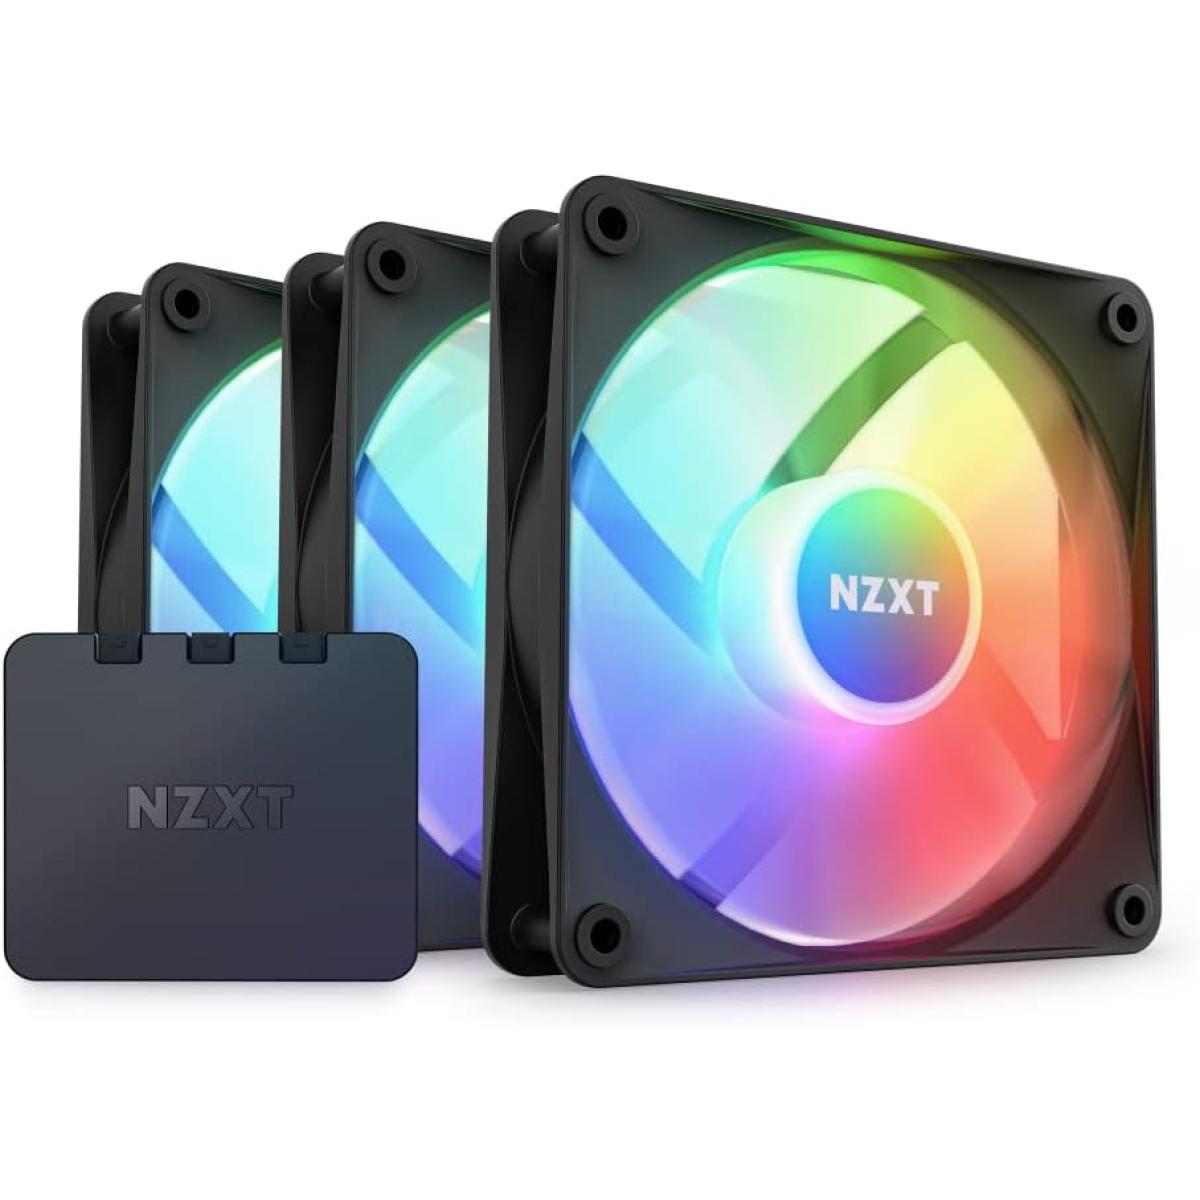 NZXT F120 RGB Core Triple Pack 3IN1 (Black) PWM Airflow Fans & Controller, Fluid Dynamic Bearing (FDB) For Quiet & Cool Operations, Elegant Frame Design & Anti-Vibration Rubber Corners